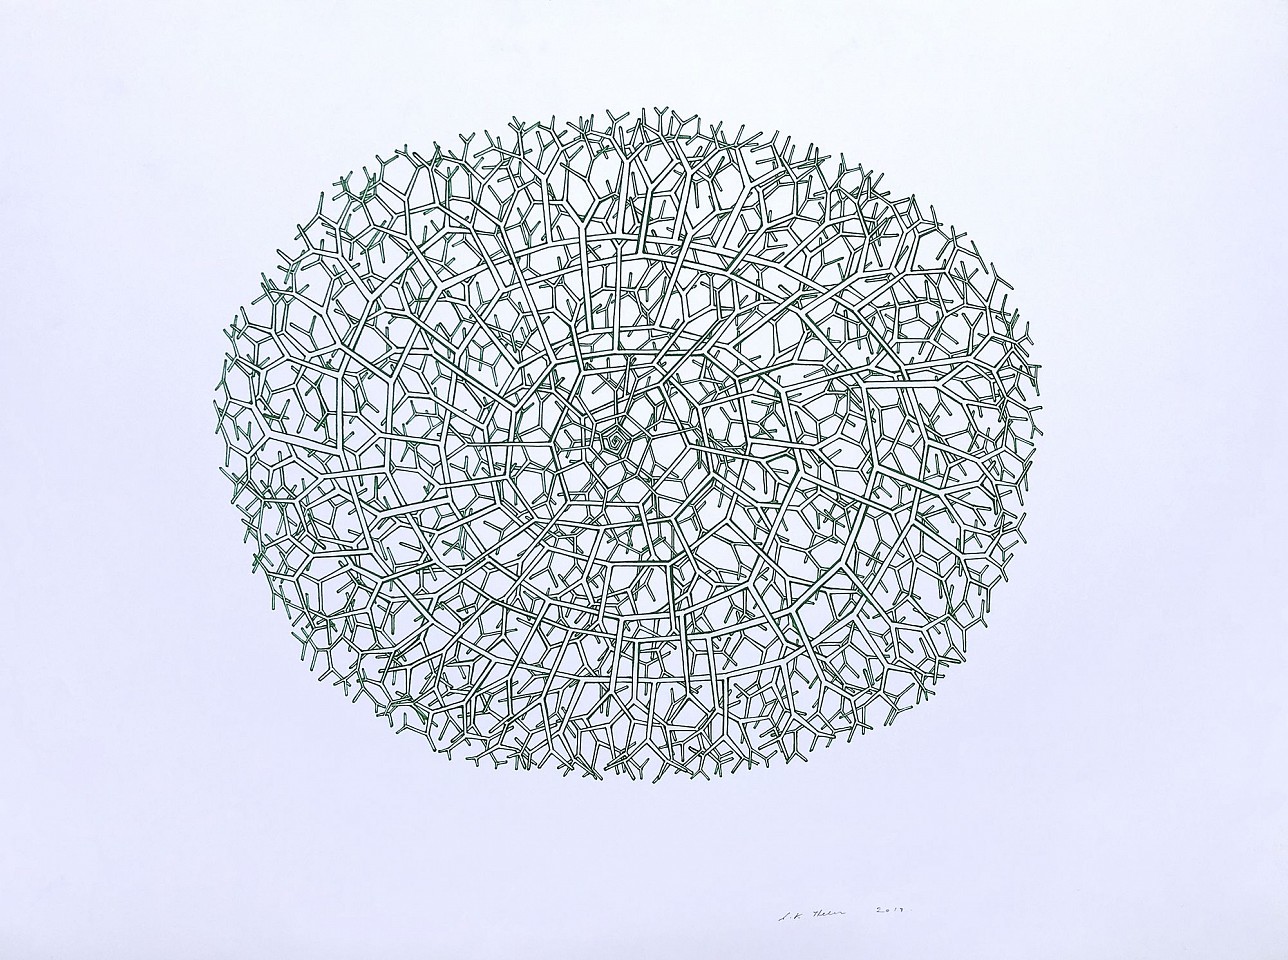 Stewart Helm, Stick Green Elliptical Cells, 2019
colored inks on paper, 18.5" x 25.5"
SH-623
Price Upon Request